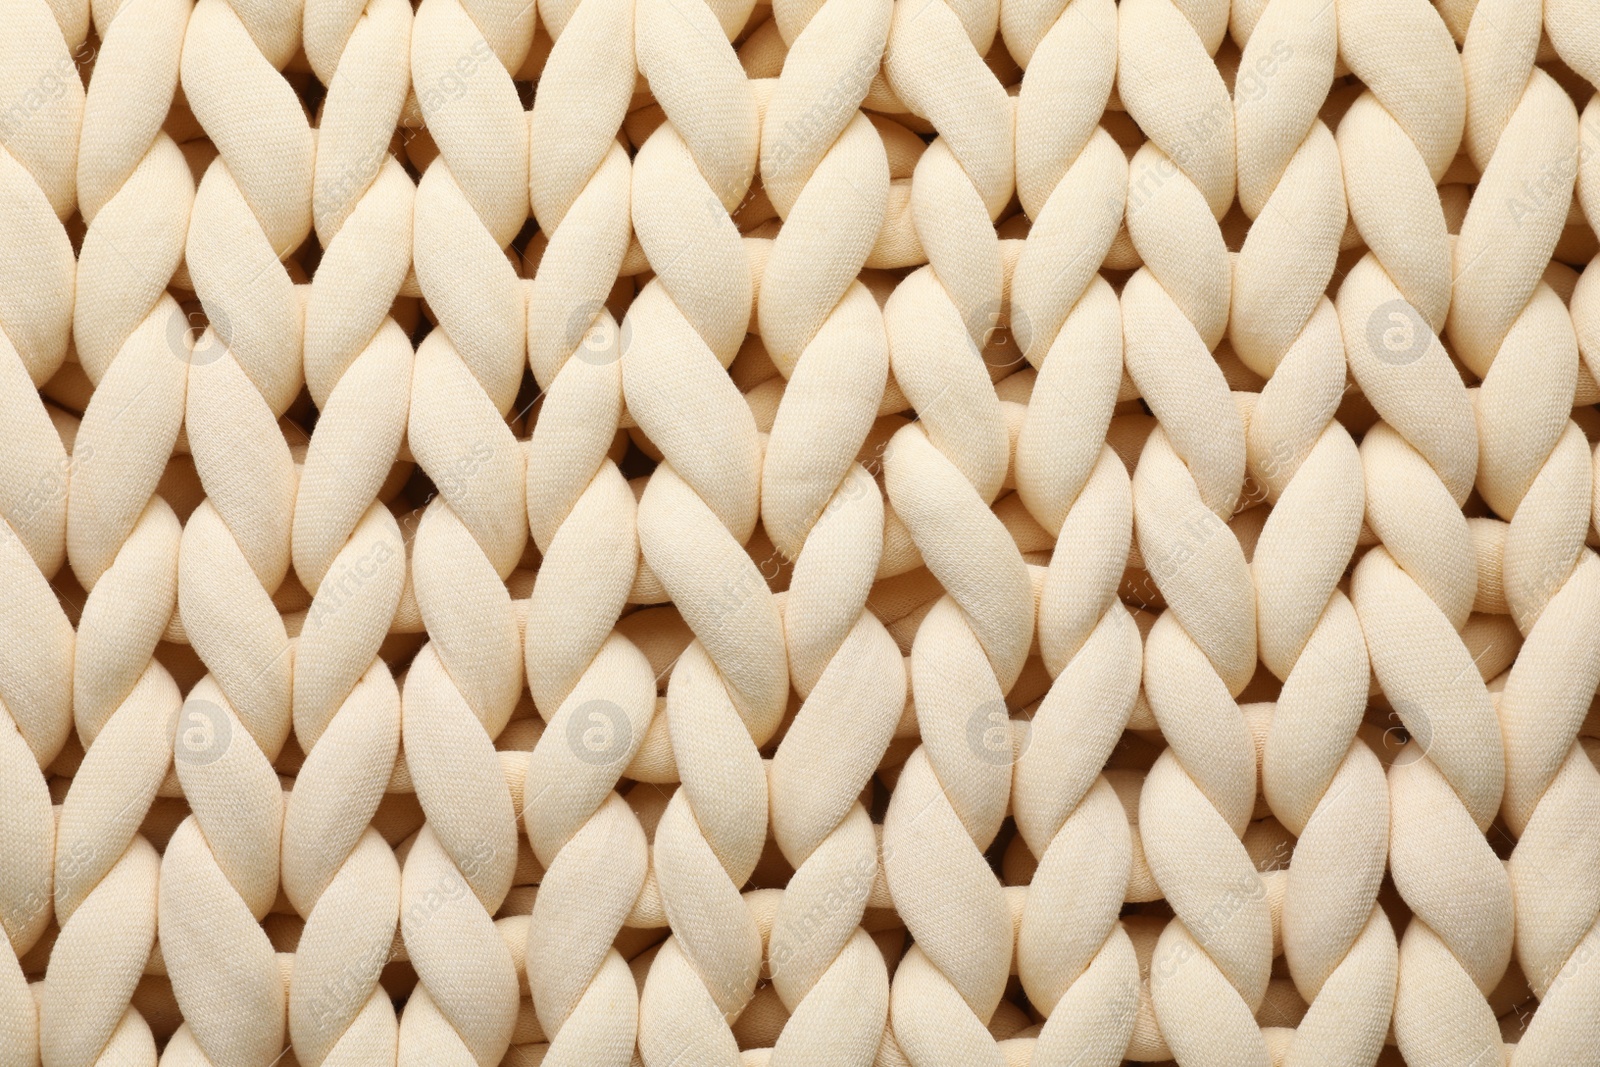 Photo of Chunky knit blankets as background, top view